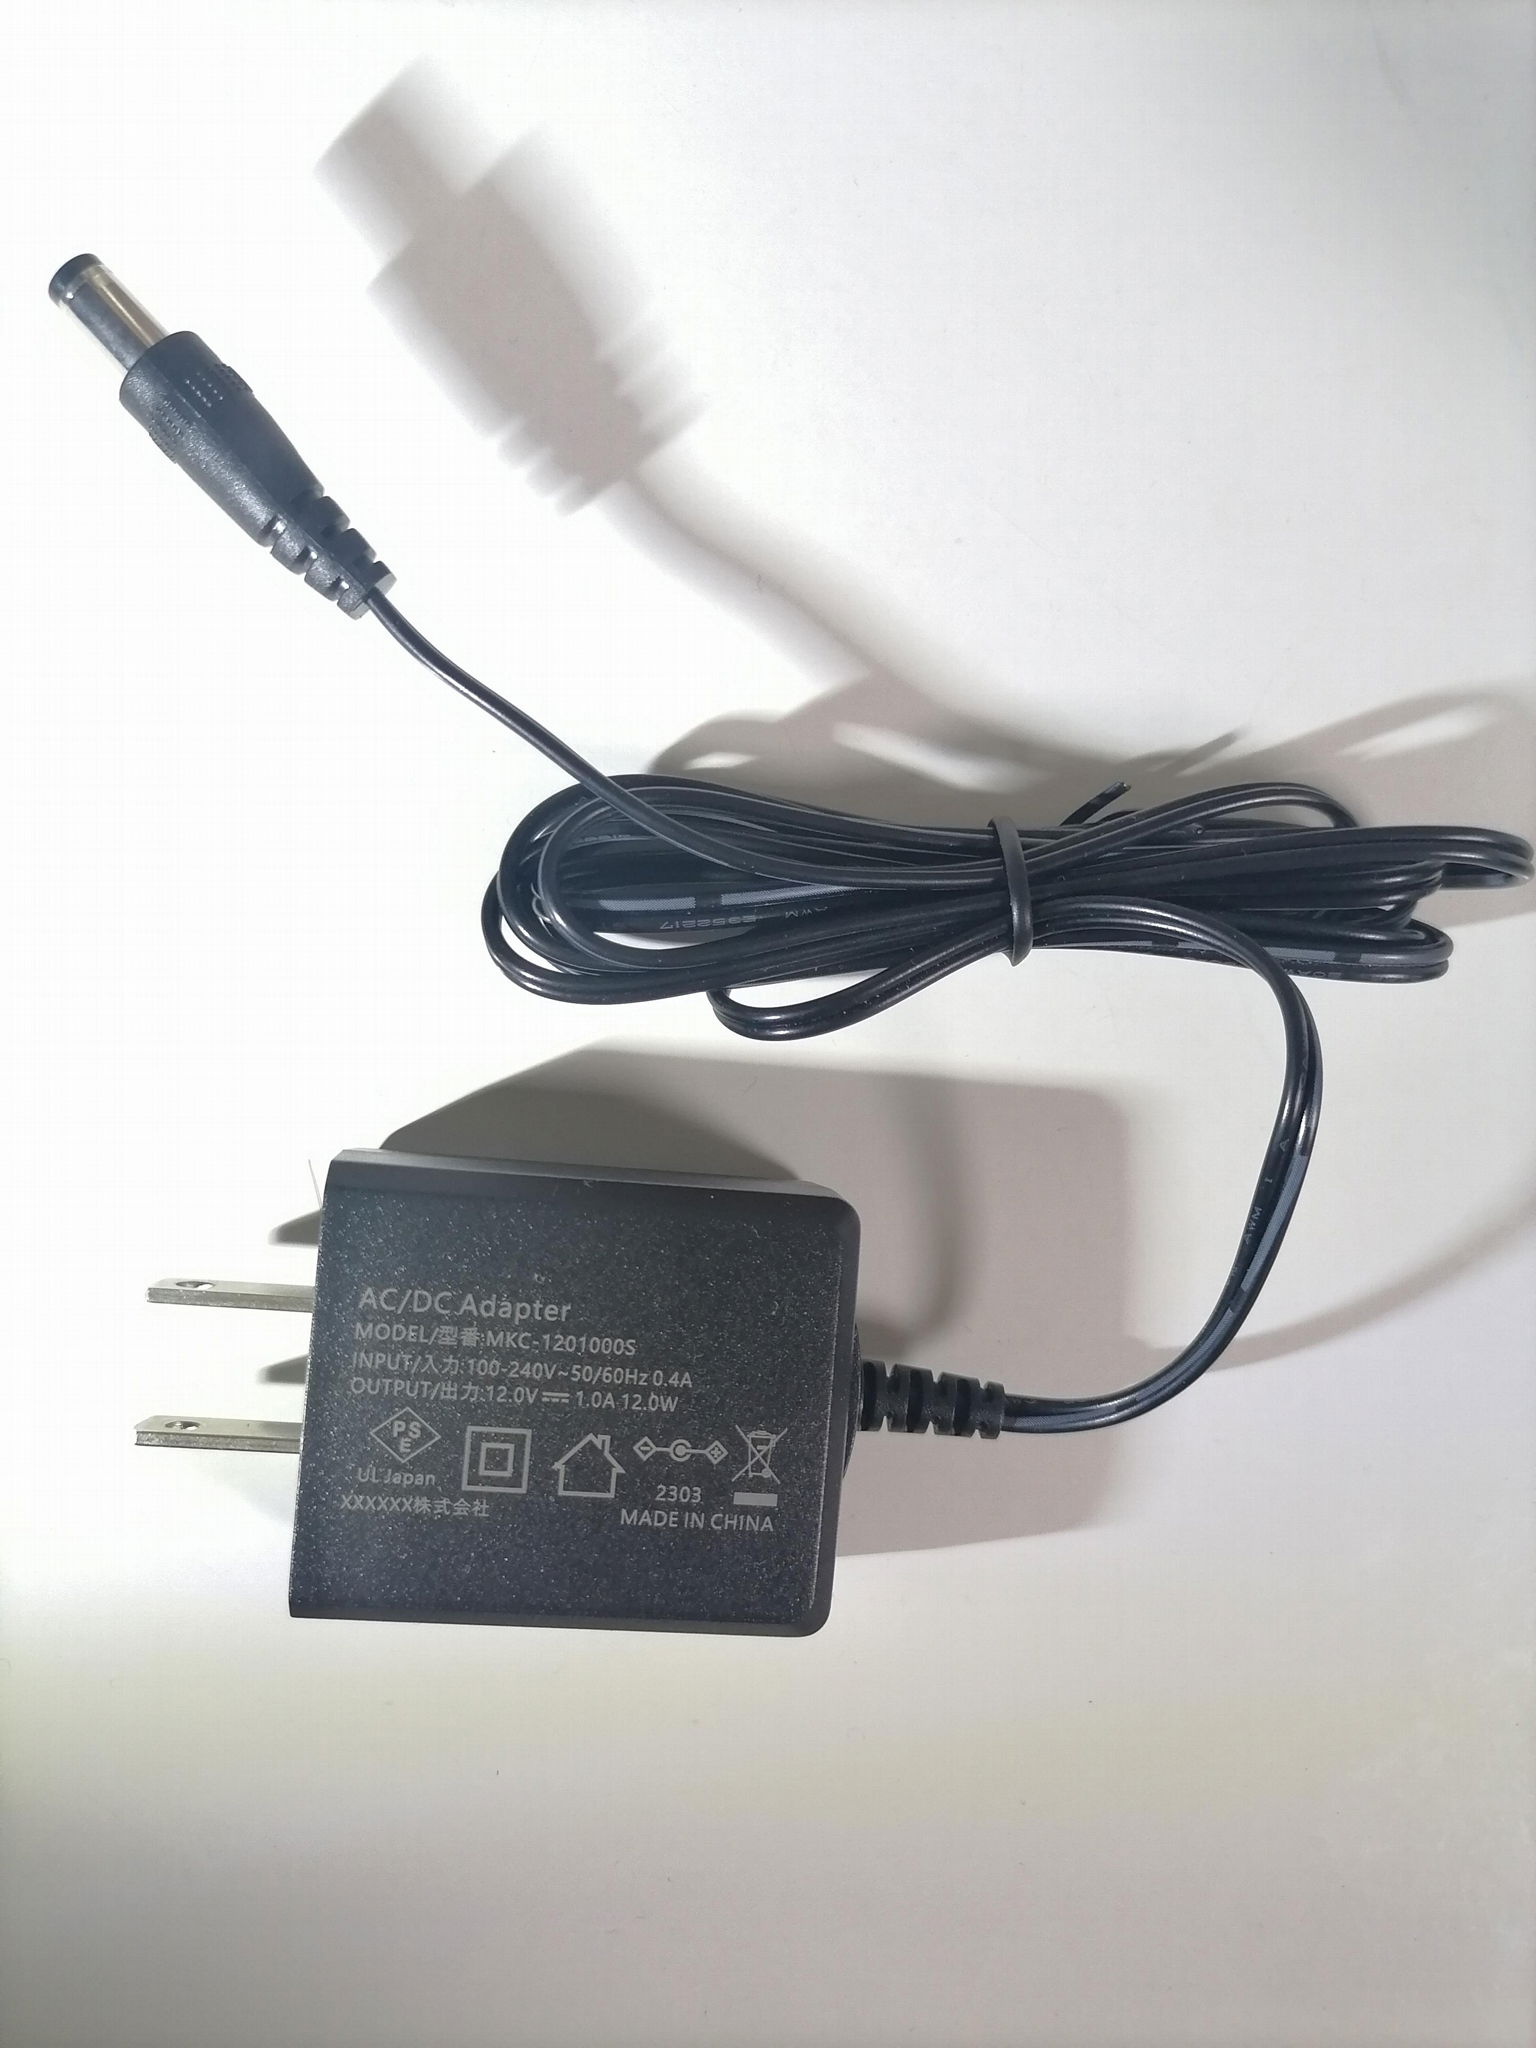 Merryking AC adapter MKS-1201000S 12V1A power adapter